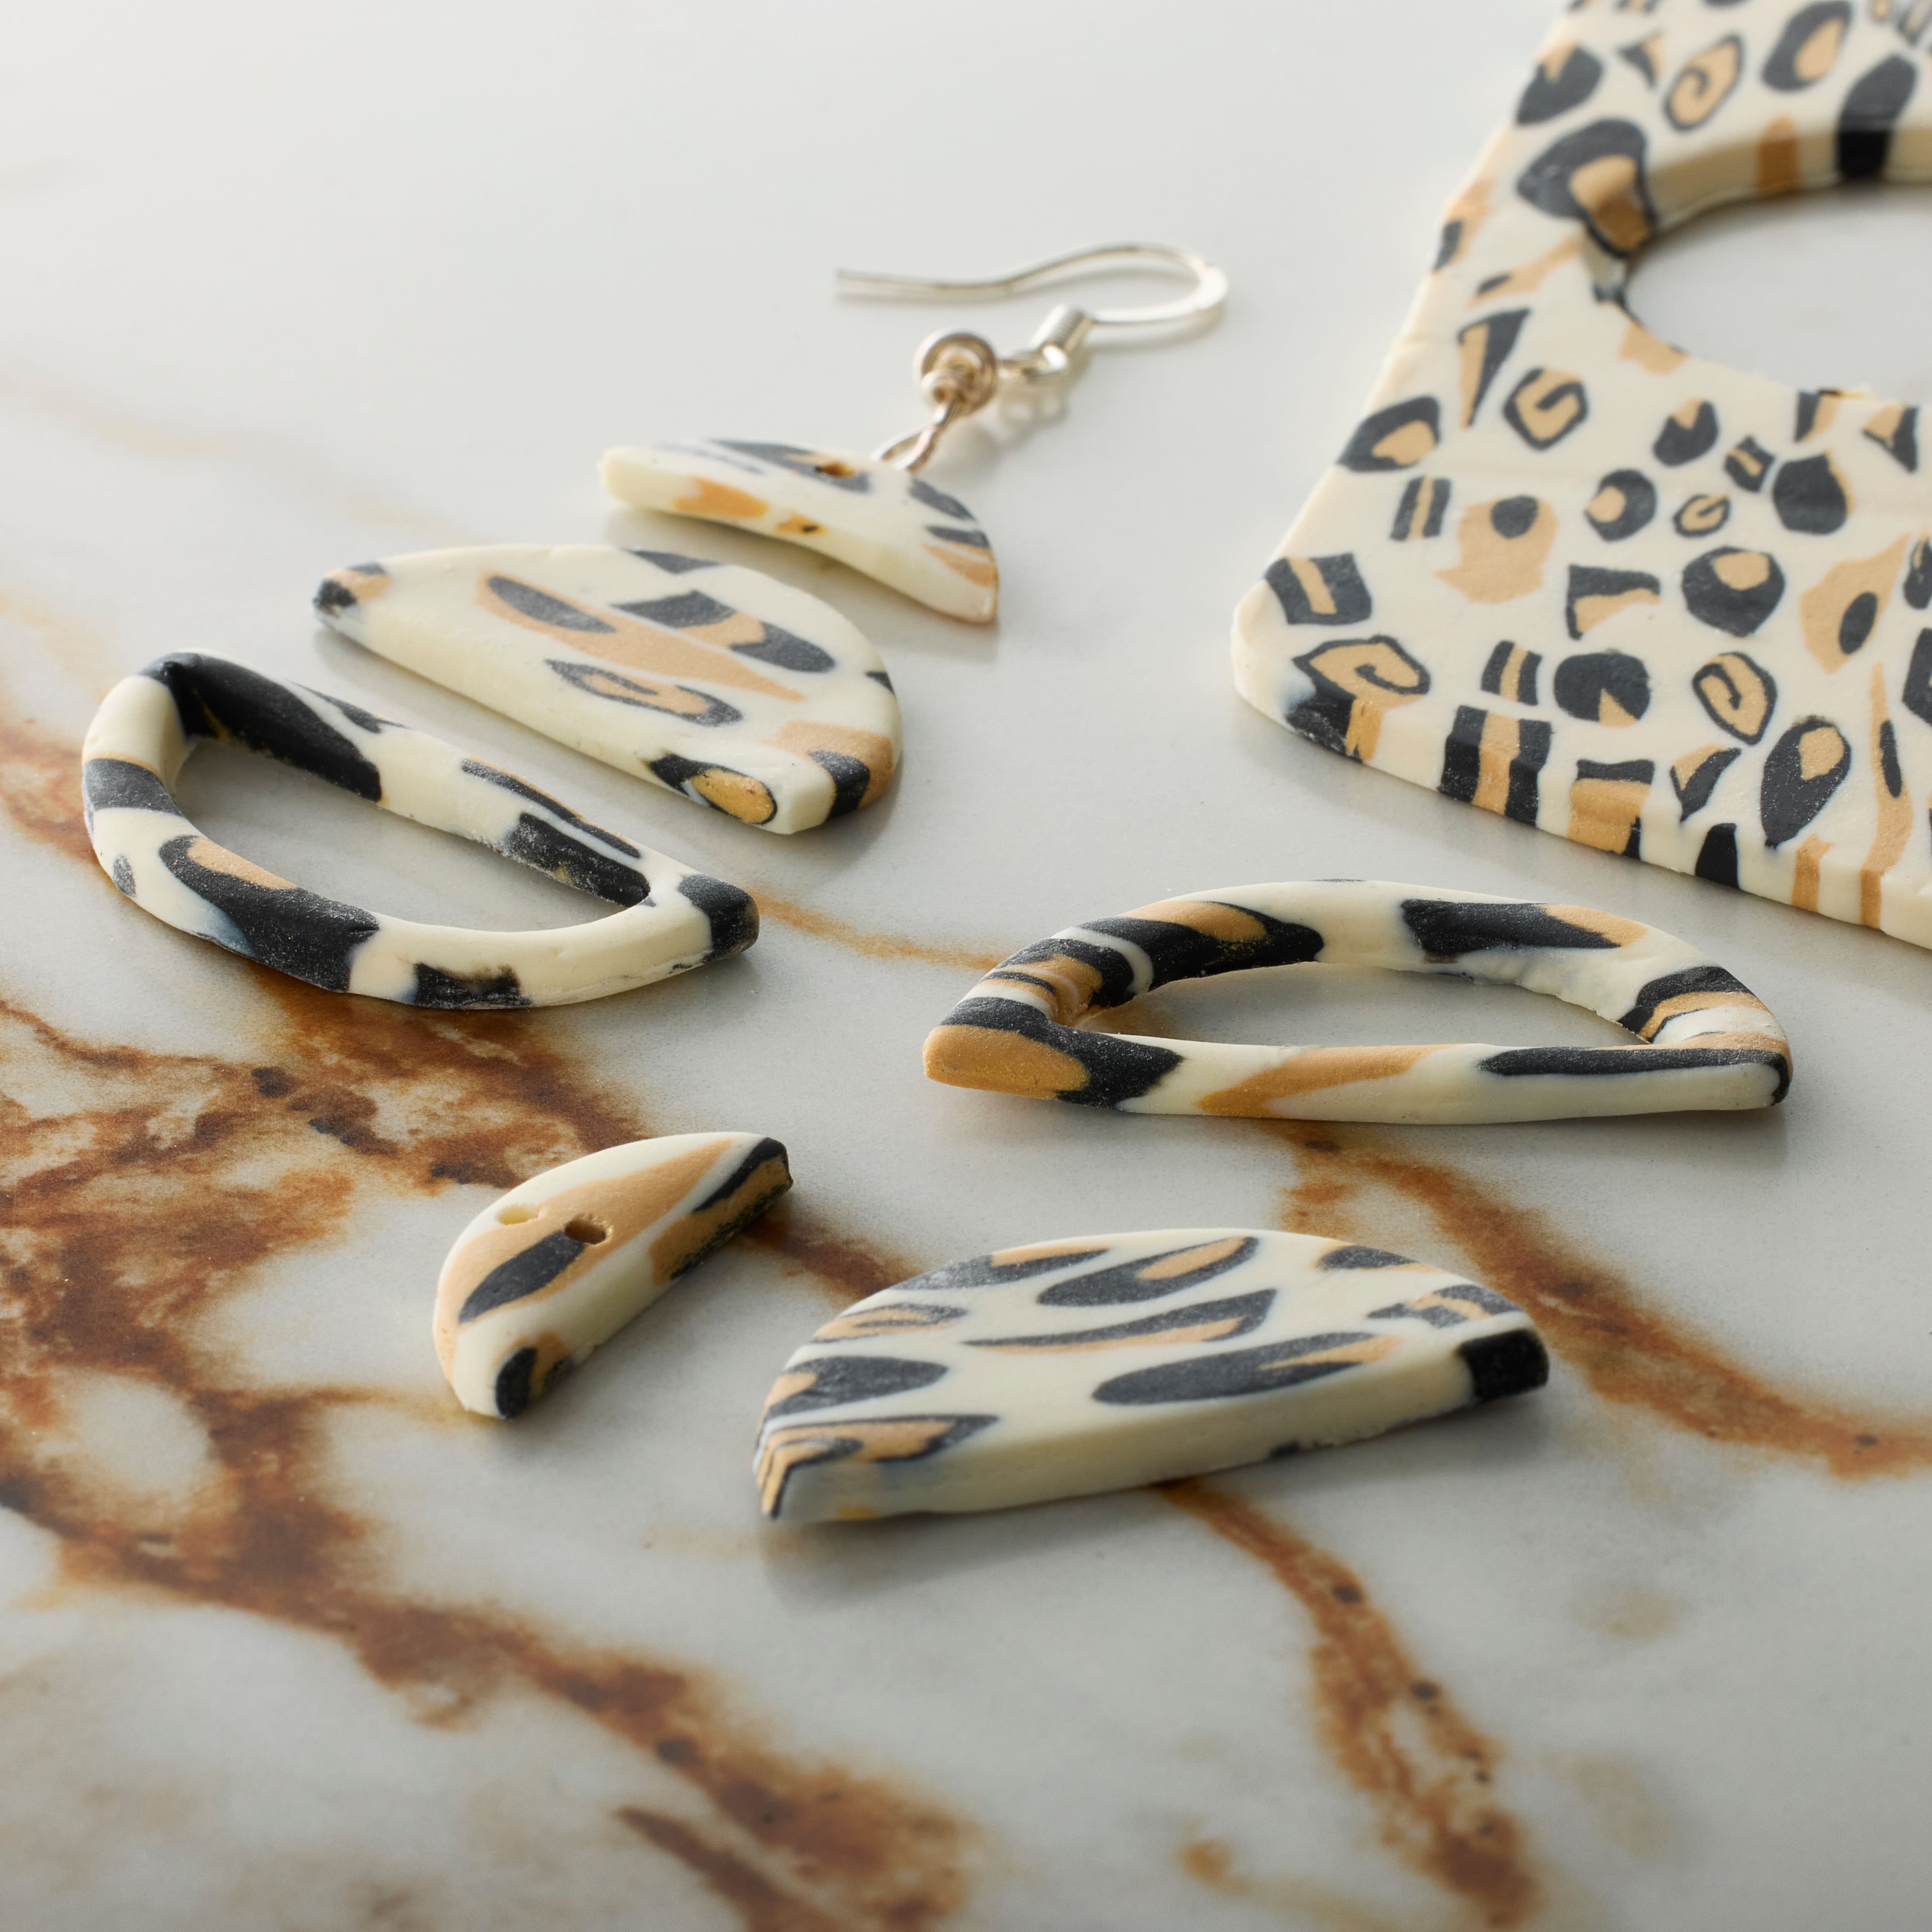 12 Pack: Gold Leopard Oven Bake Polymer Clay by Bead Landing&#x2122;